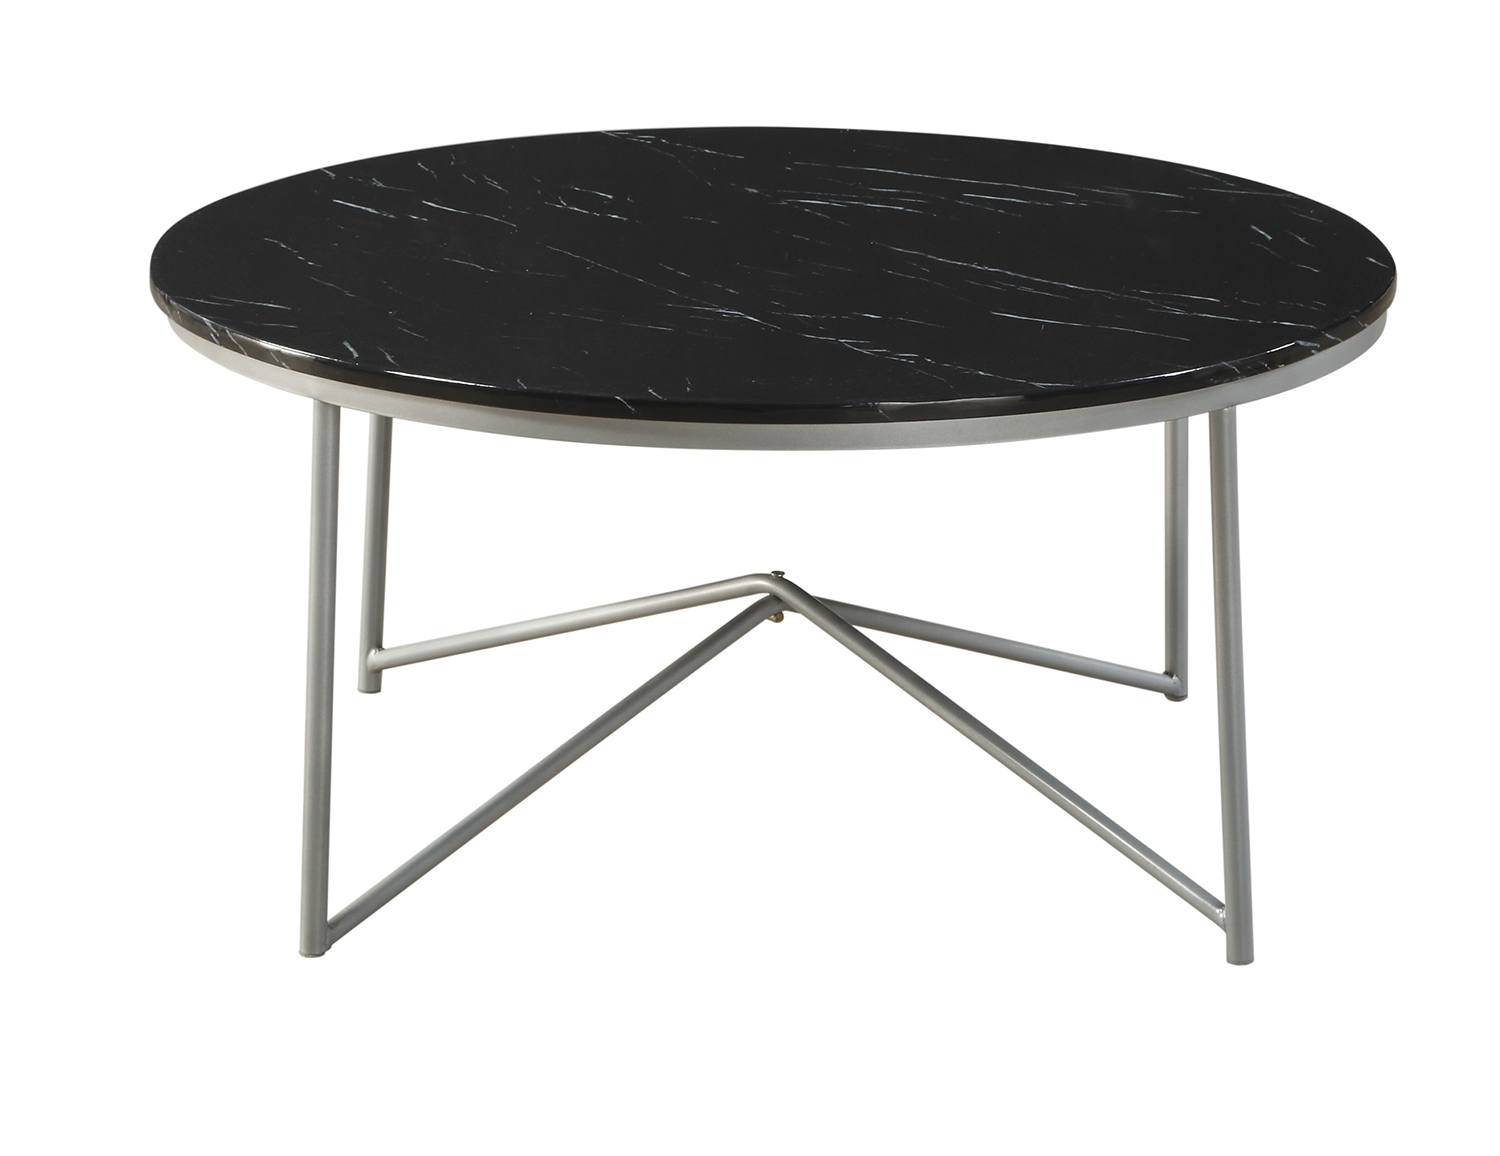 Homelegance Perivale 3-Piece Cocktail/Coffee Tables - Black Marble - Silver Legs